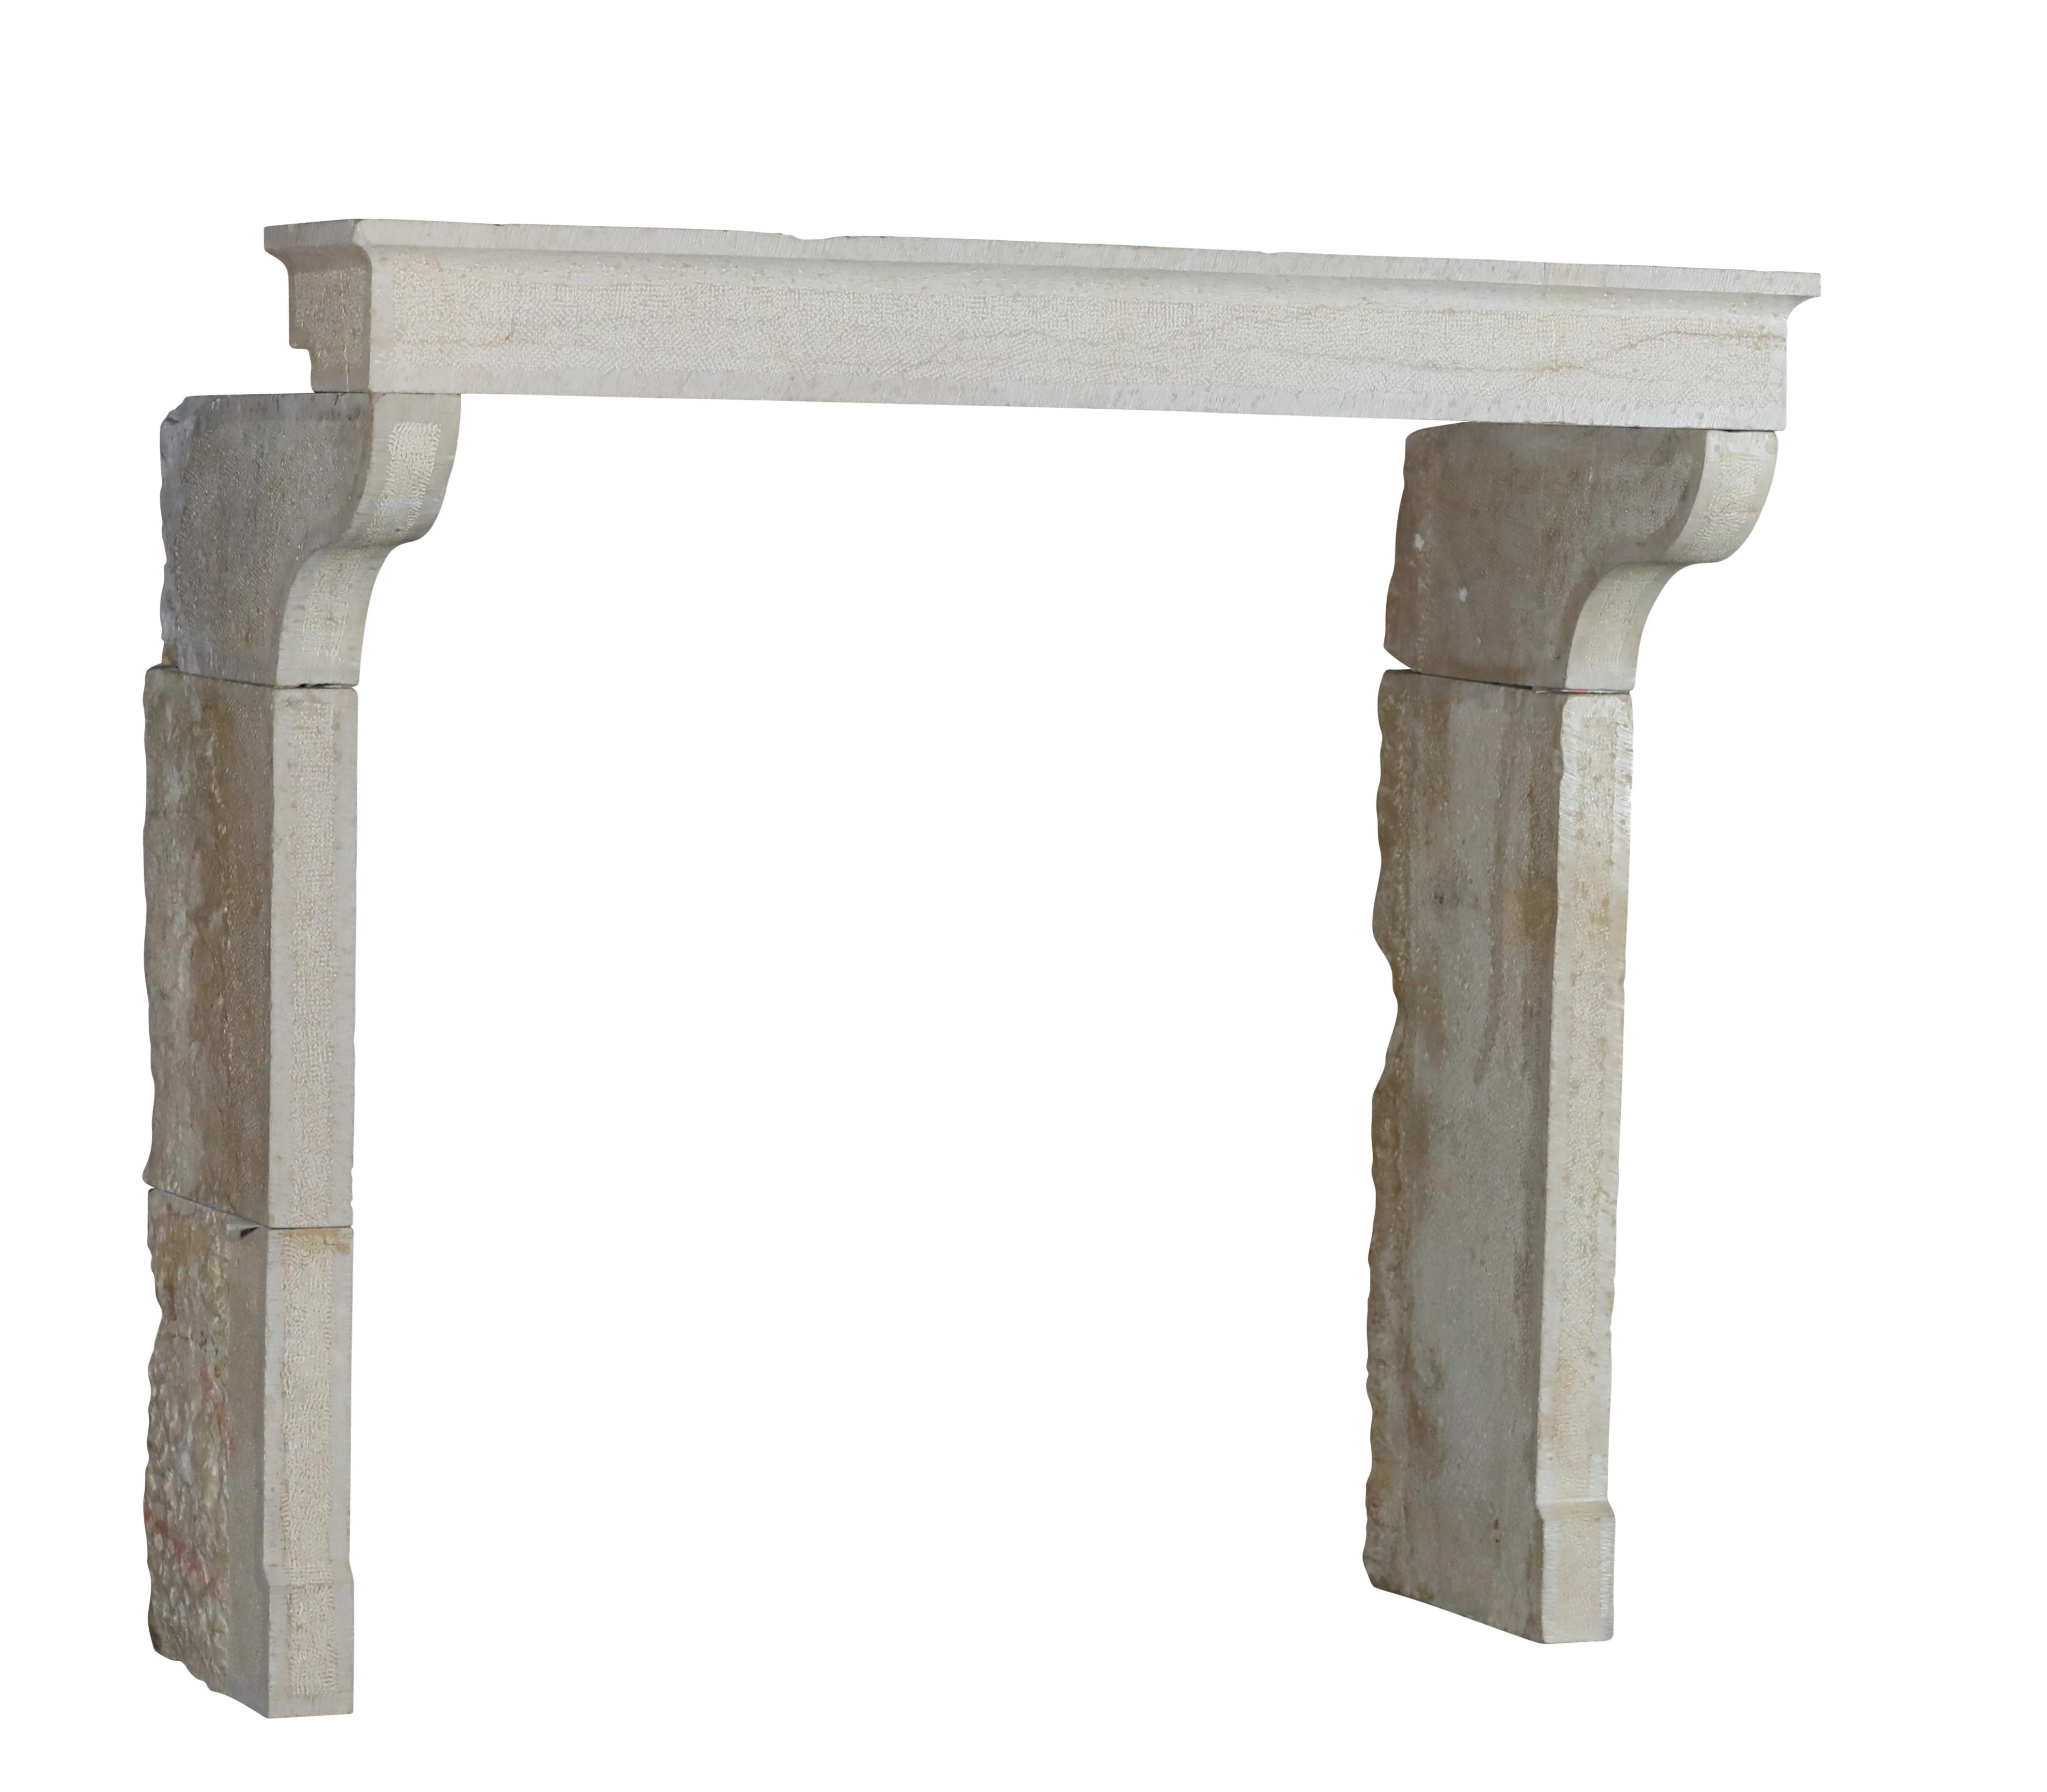 Elegant French cottage style limestone fireplace surround in great condition.
This beige limestone antique fireplace mantle blend well in a rich sunlight interior.
Measurements:
176 cm Exterior Width 69,29 Inch
165 cm Exterior Height 64,96